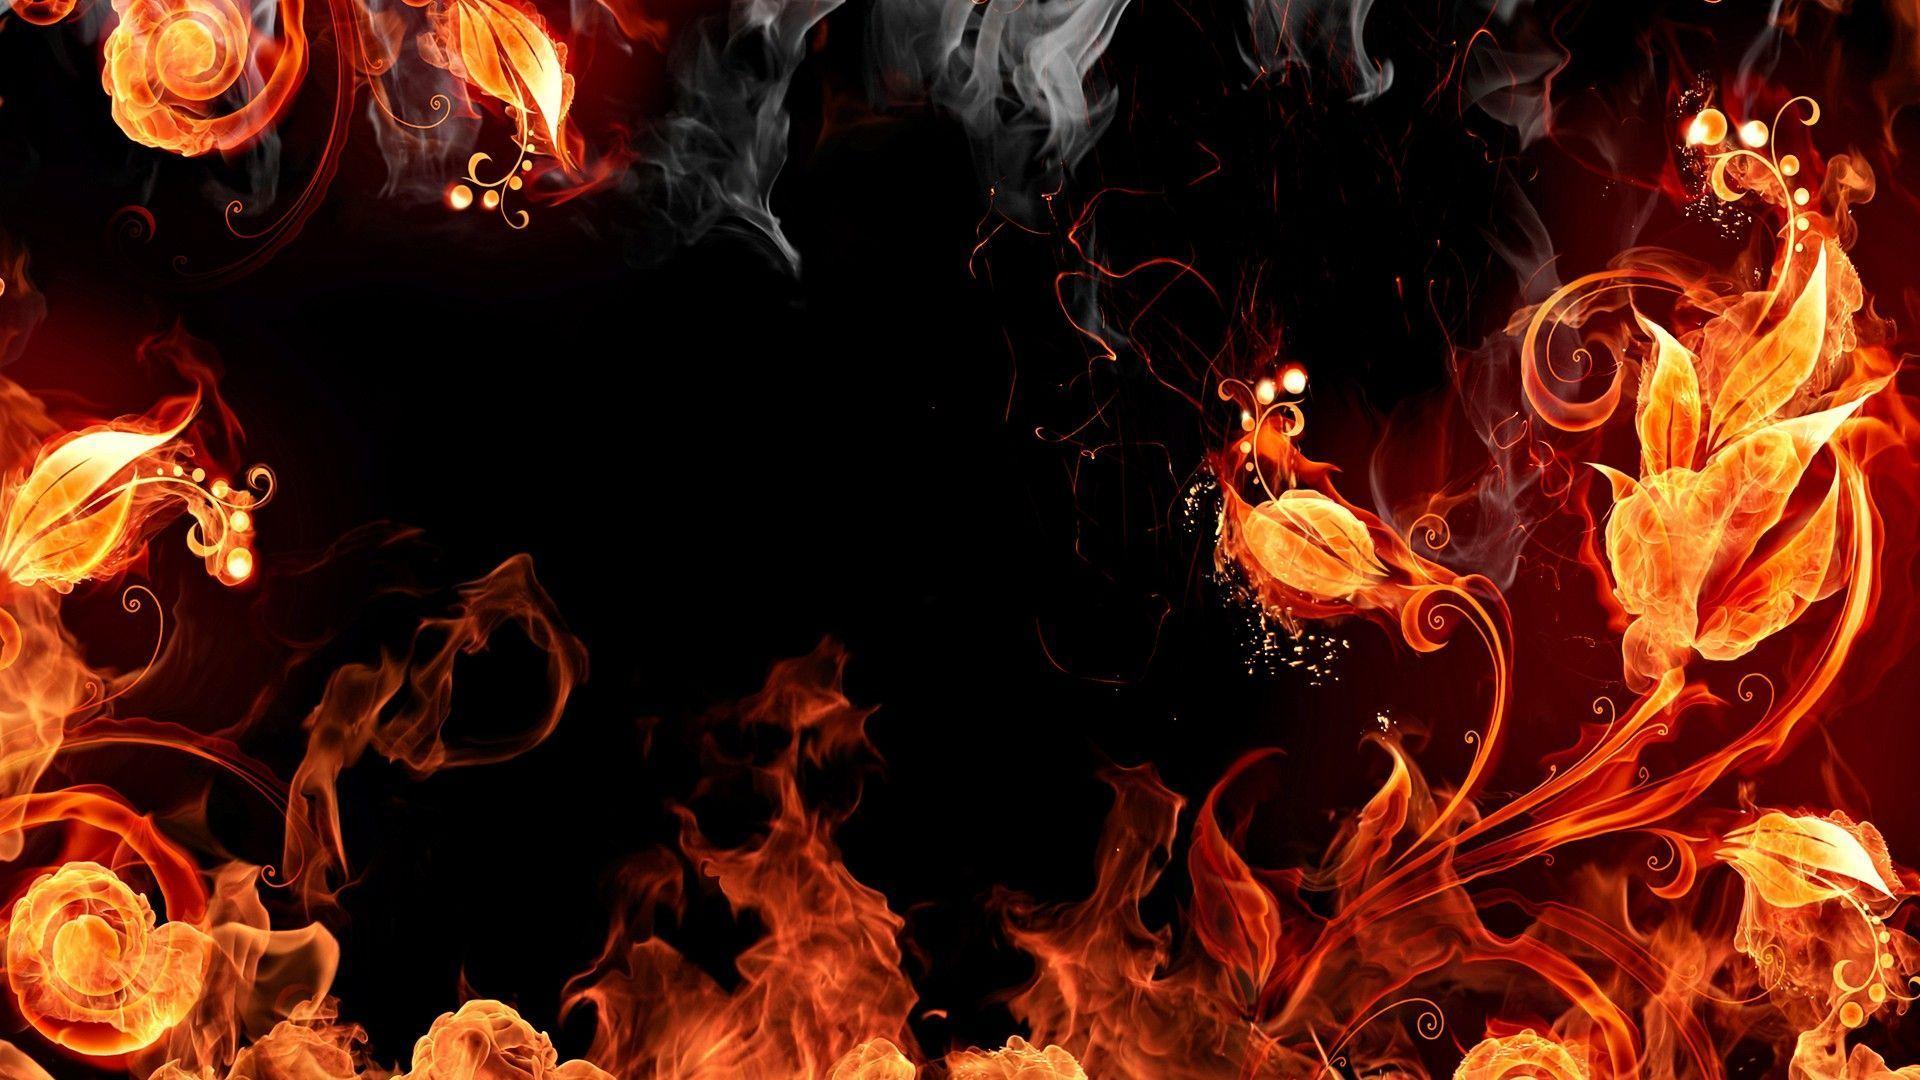 Fire Images On Black Backgrounds Wallpaper Cave